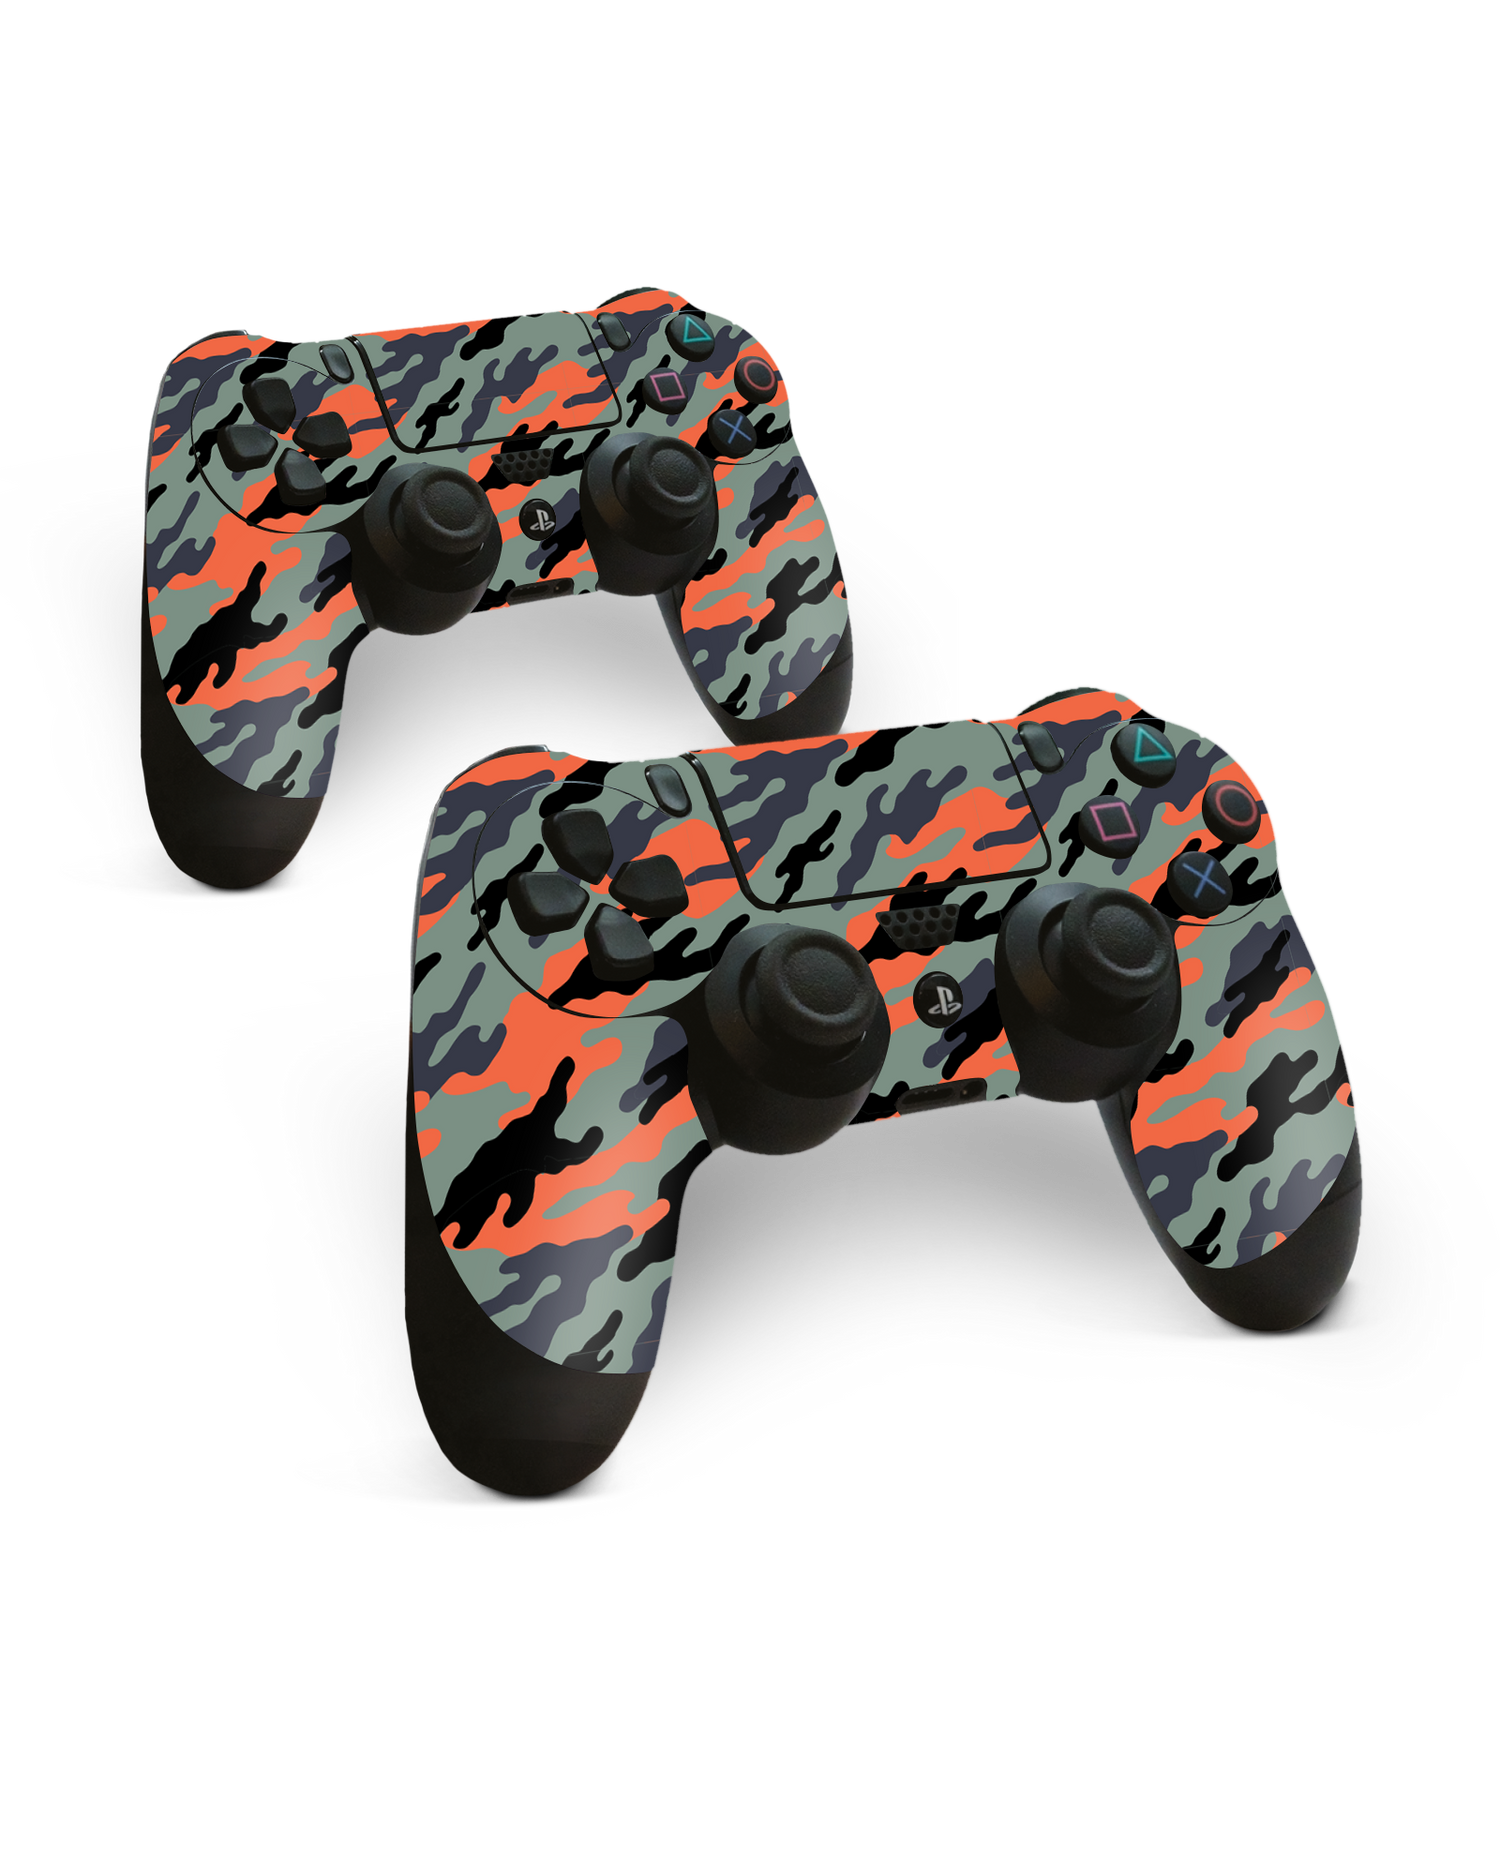 Camo Sunset Console Skin for Sony PlayStation 4 Controller: Side View